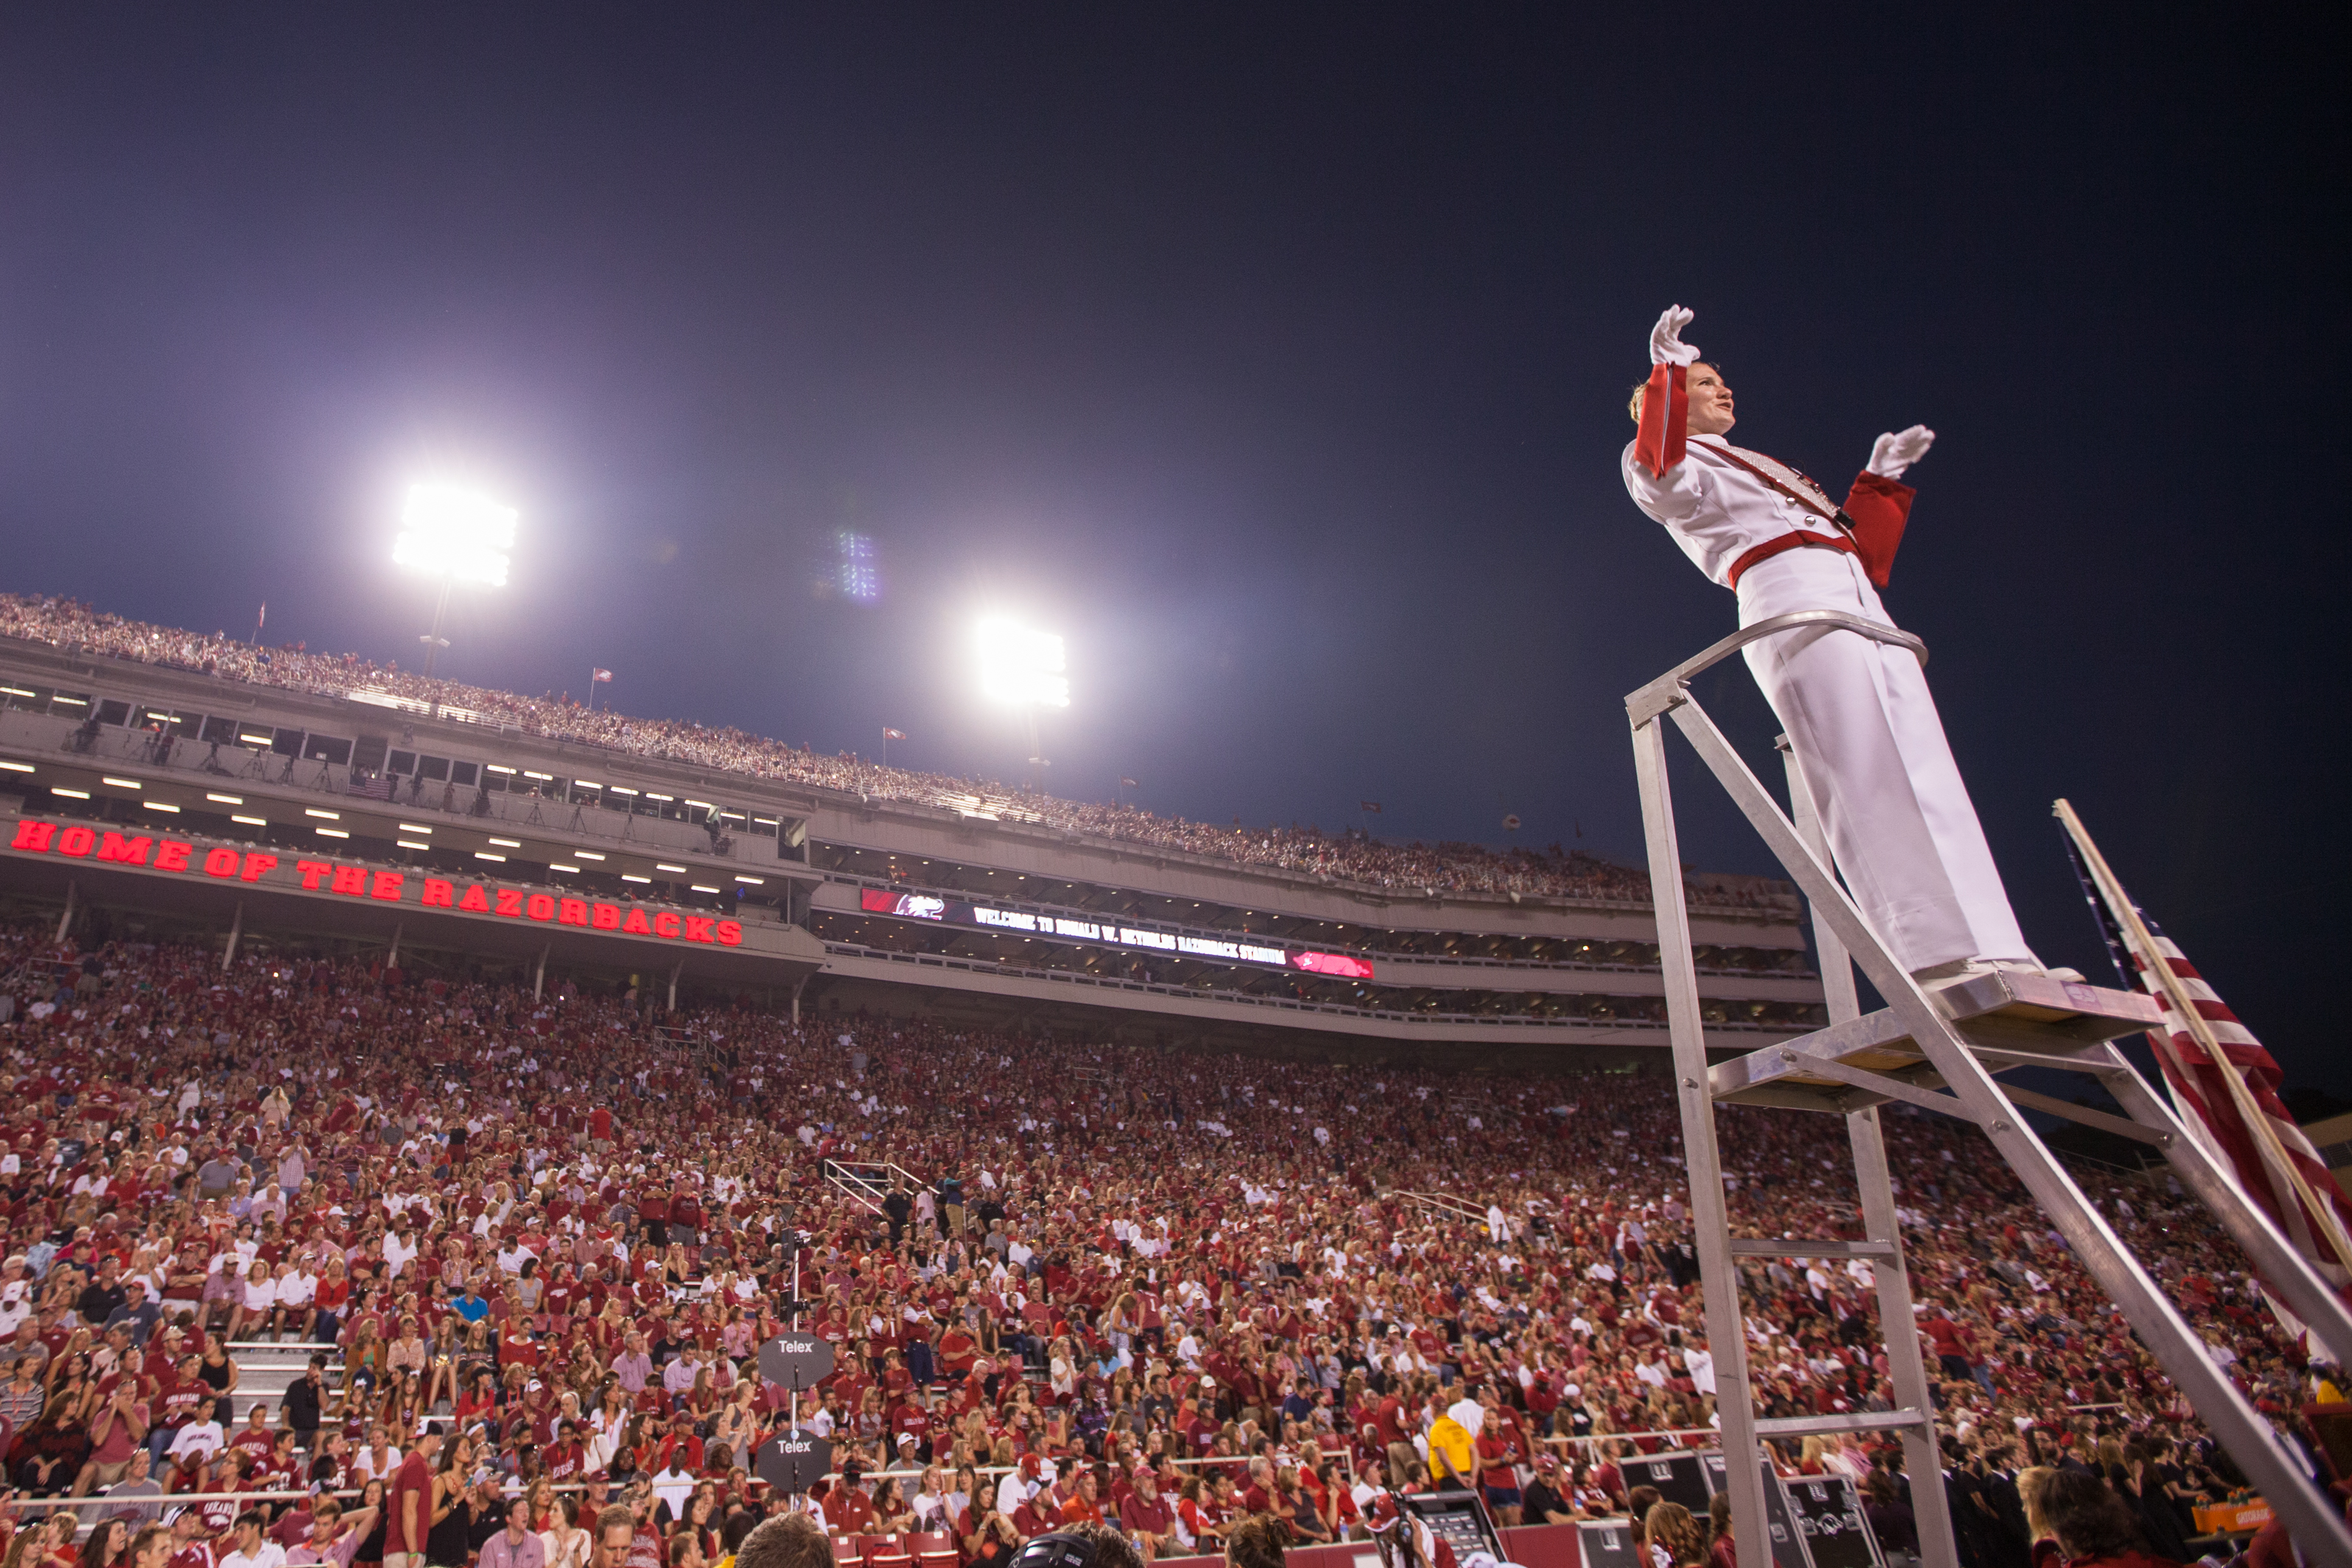 Head drum major Jamey Julian leads the Razorback Marching Band during a recent halftime performance. (Photo by Matt Reynolds.)